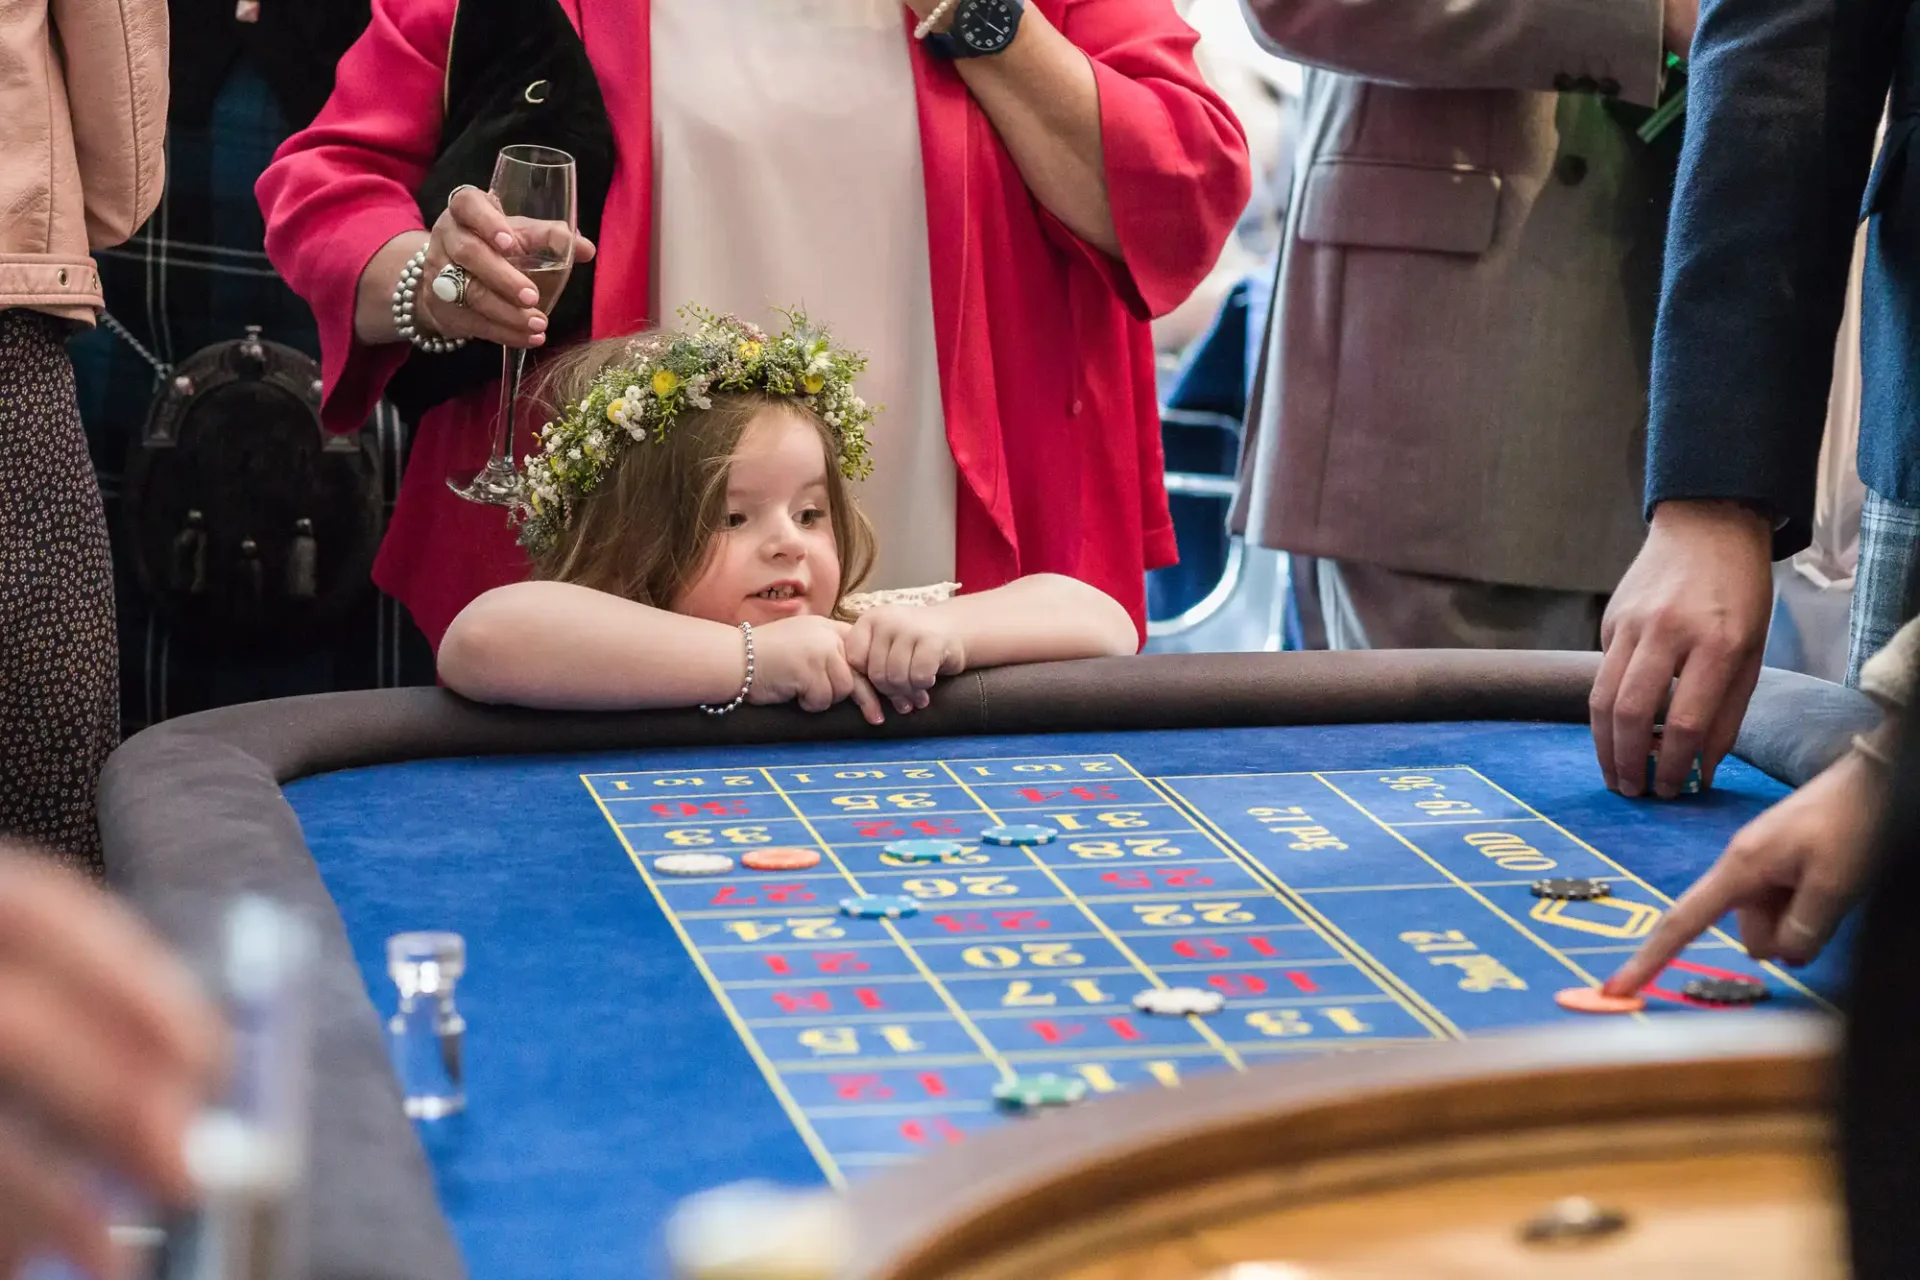 A young girl wearing a floral wreath on her head leans on a casino table, watching a roulette game in progress, surrounded by adults.